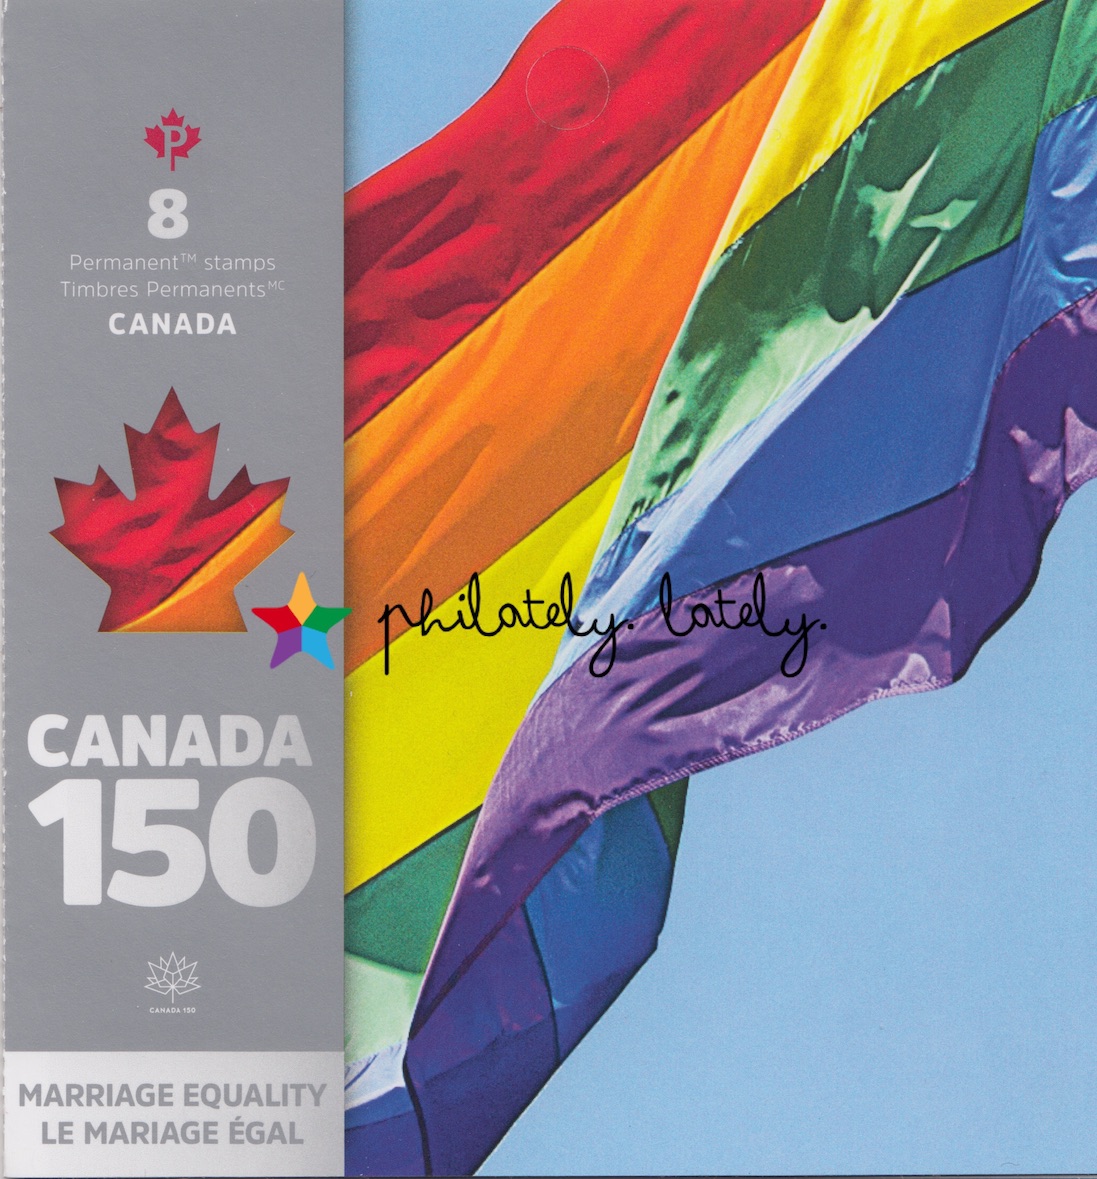 014_Canada_LGBT_Stamps.jpg